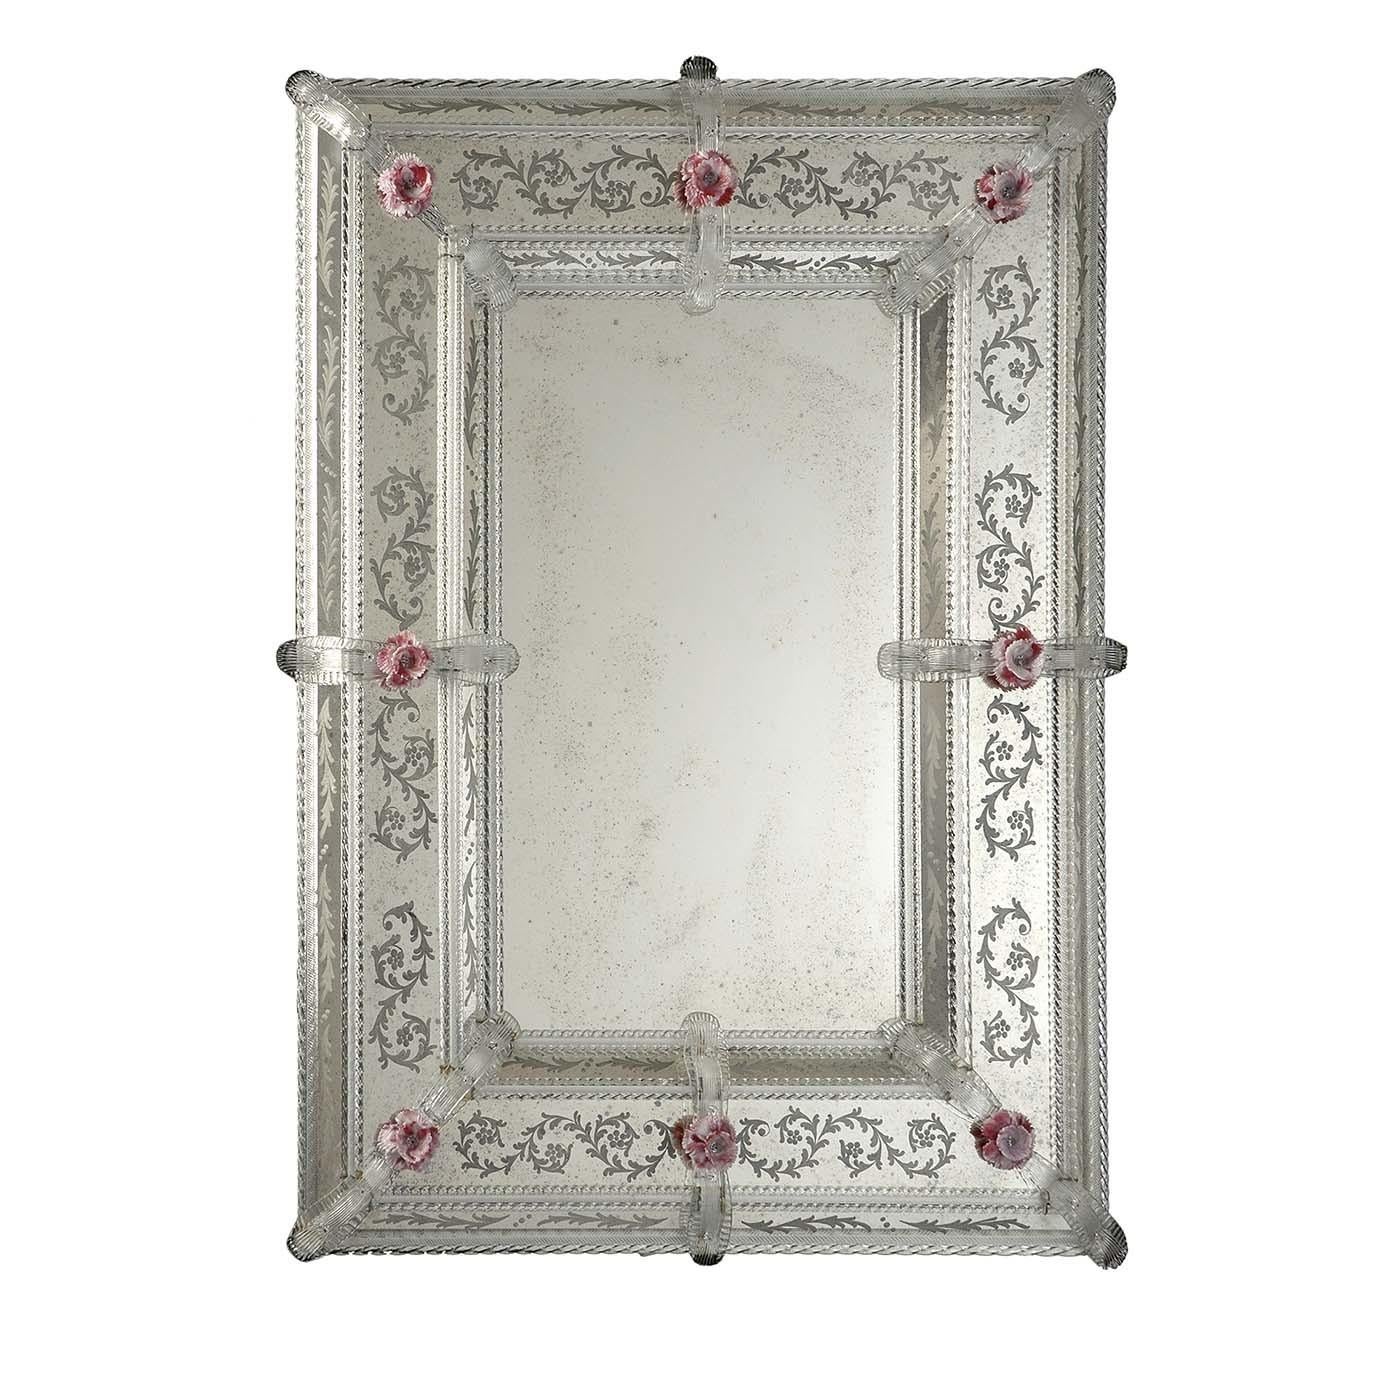 A magnificent example of Venetian artifact, the frame of this rectangular mirror was crafted of mouth-blown Murano glass and boasts three layers of decorations, all etched on the glass and featuring delicate floral motifs. The standout decoration of